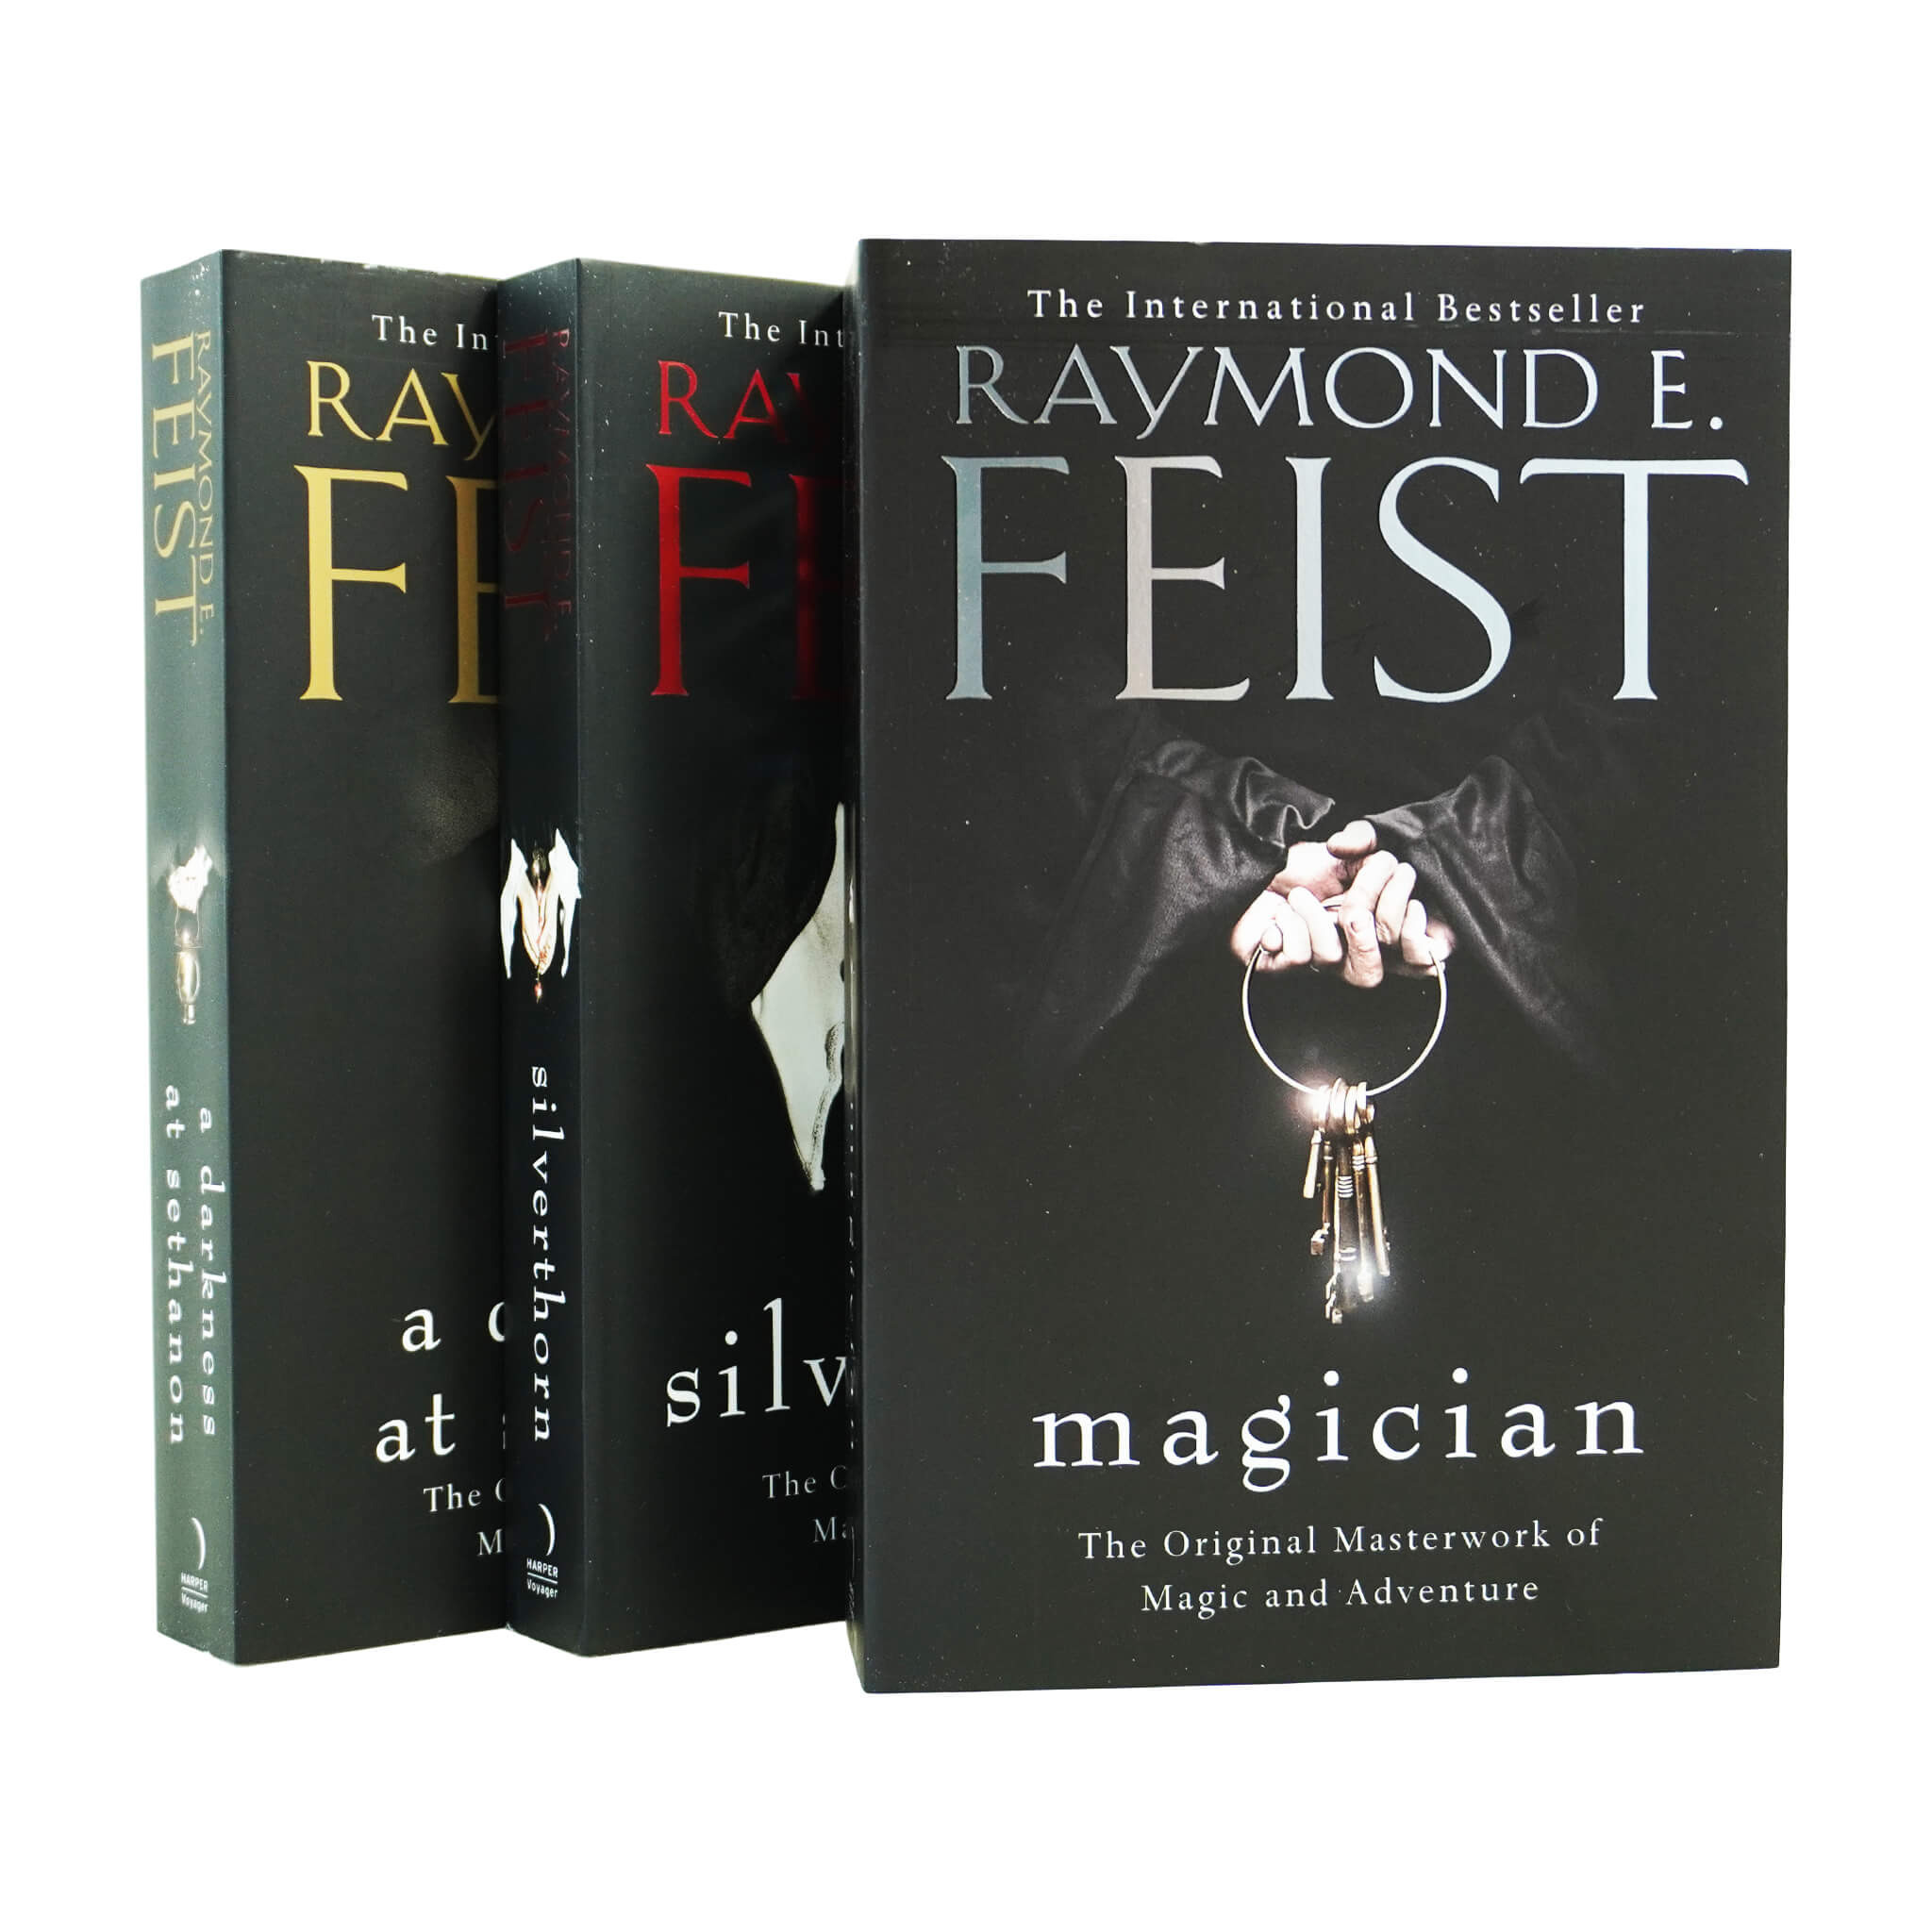 Riftwar Saga Trilogy 3 Books Young Adult Collection Paperback Set By Raymond E. Feist